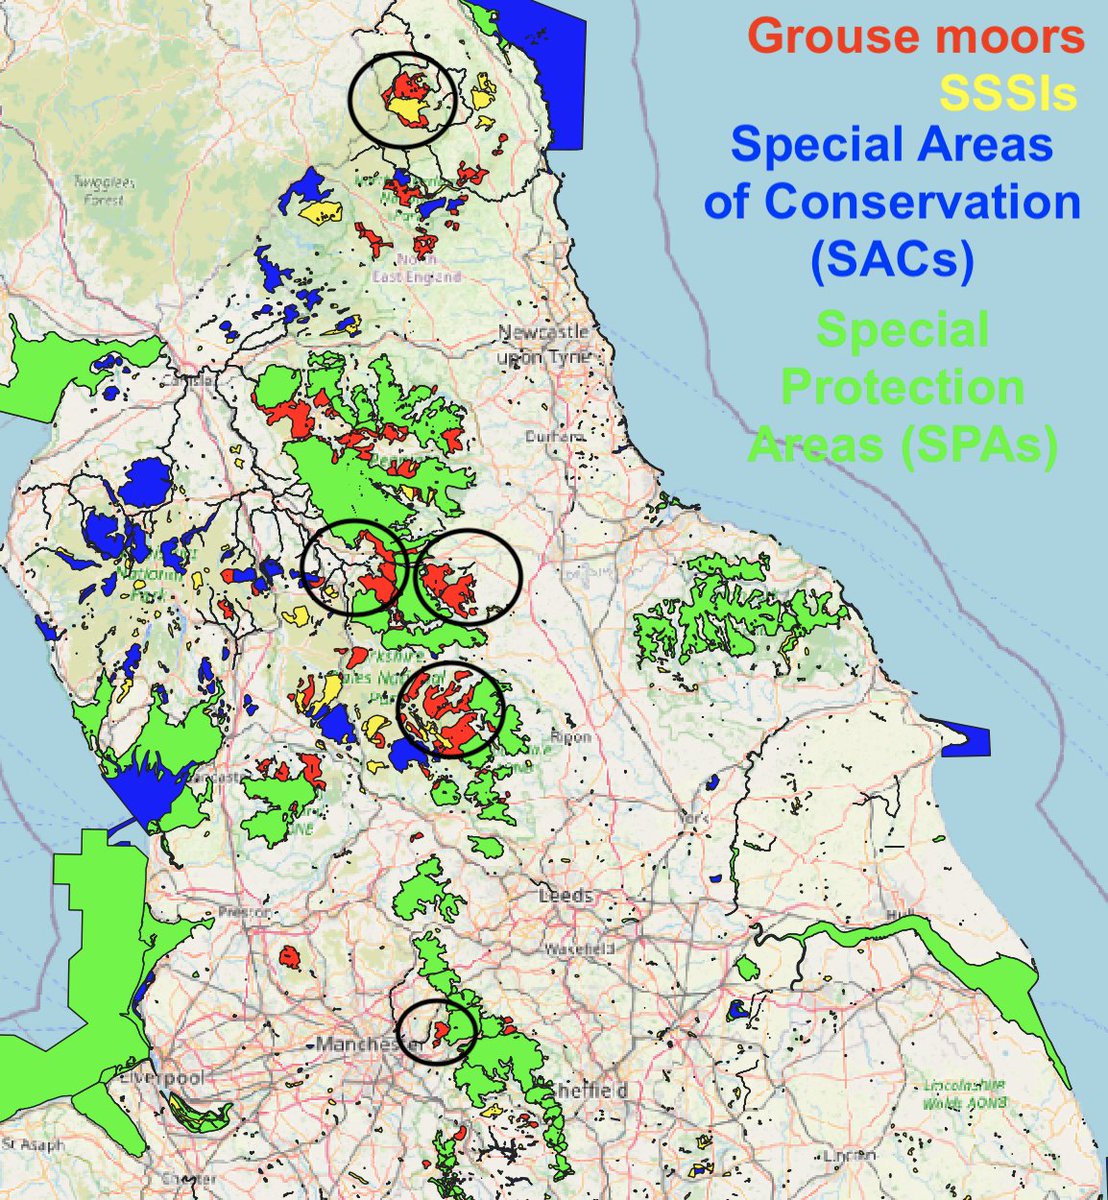 (4/n) Outside of the North York Moors, there are also a number of other grouse moor estates that look like they could escape the Govt's burning ban - because they're not designated as SSSIs / SACs / SPAs. This is despite them still containing lots of carbon-rich peat.